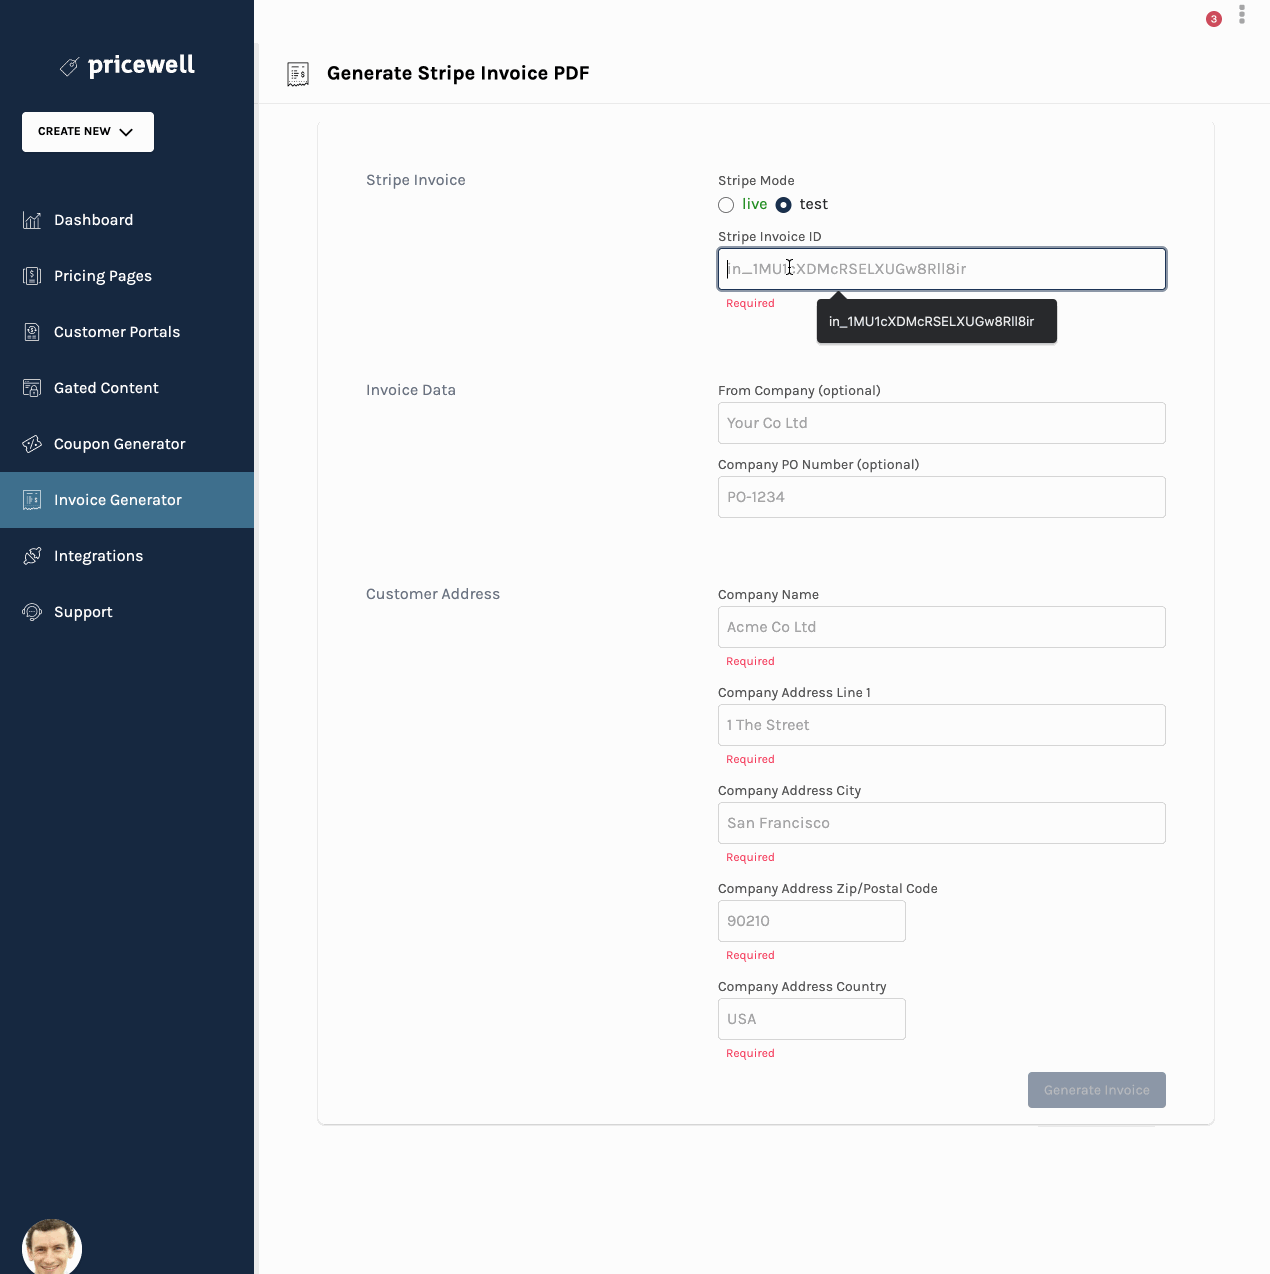 animation showing how to generate a Stripe invoice pdf with PriceWell